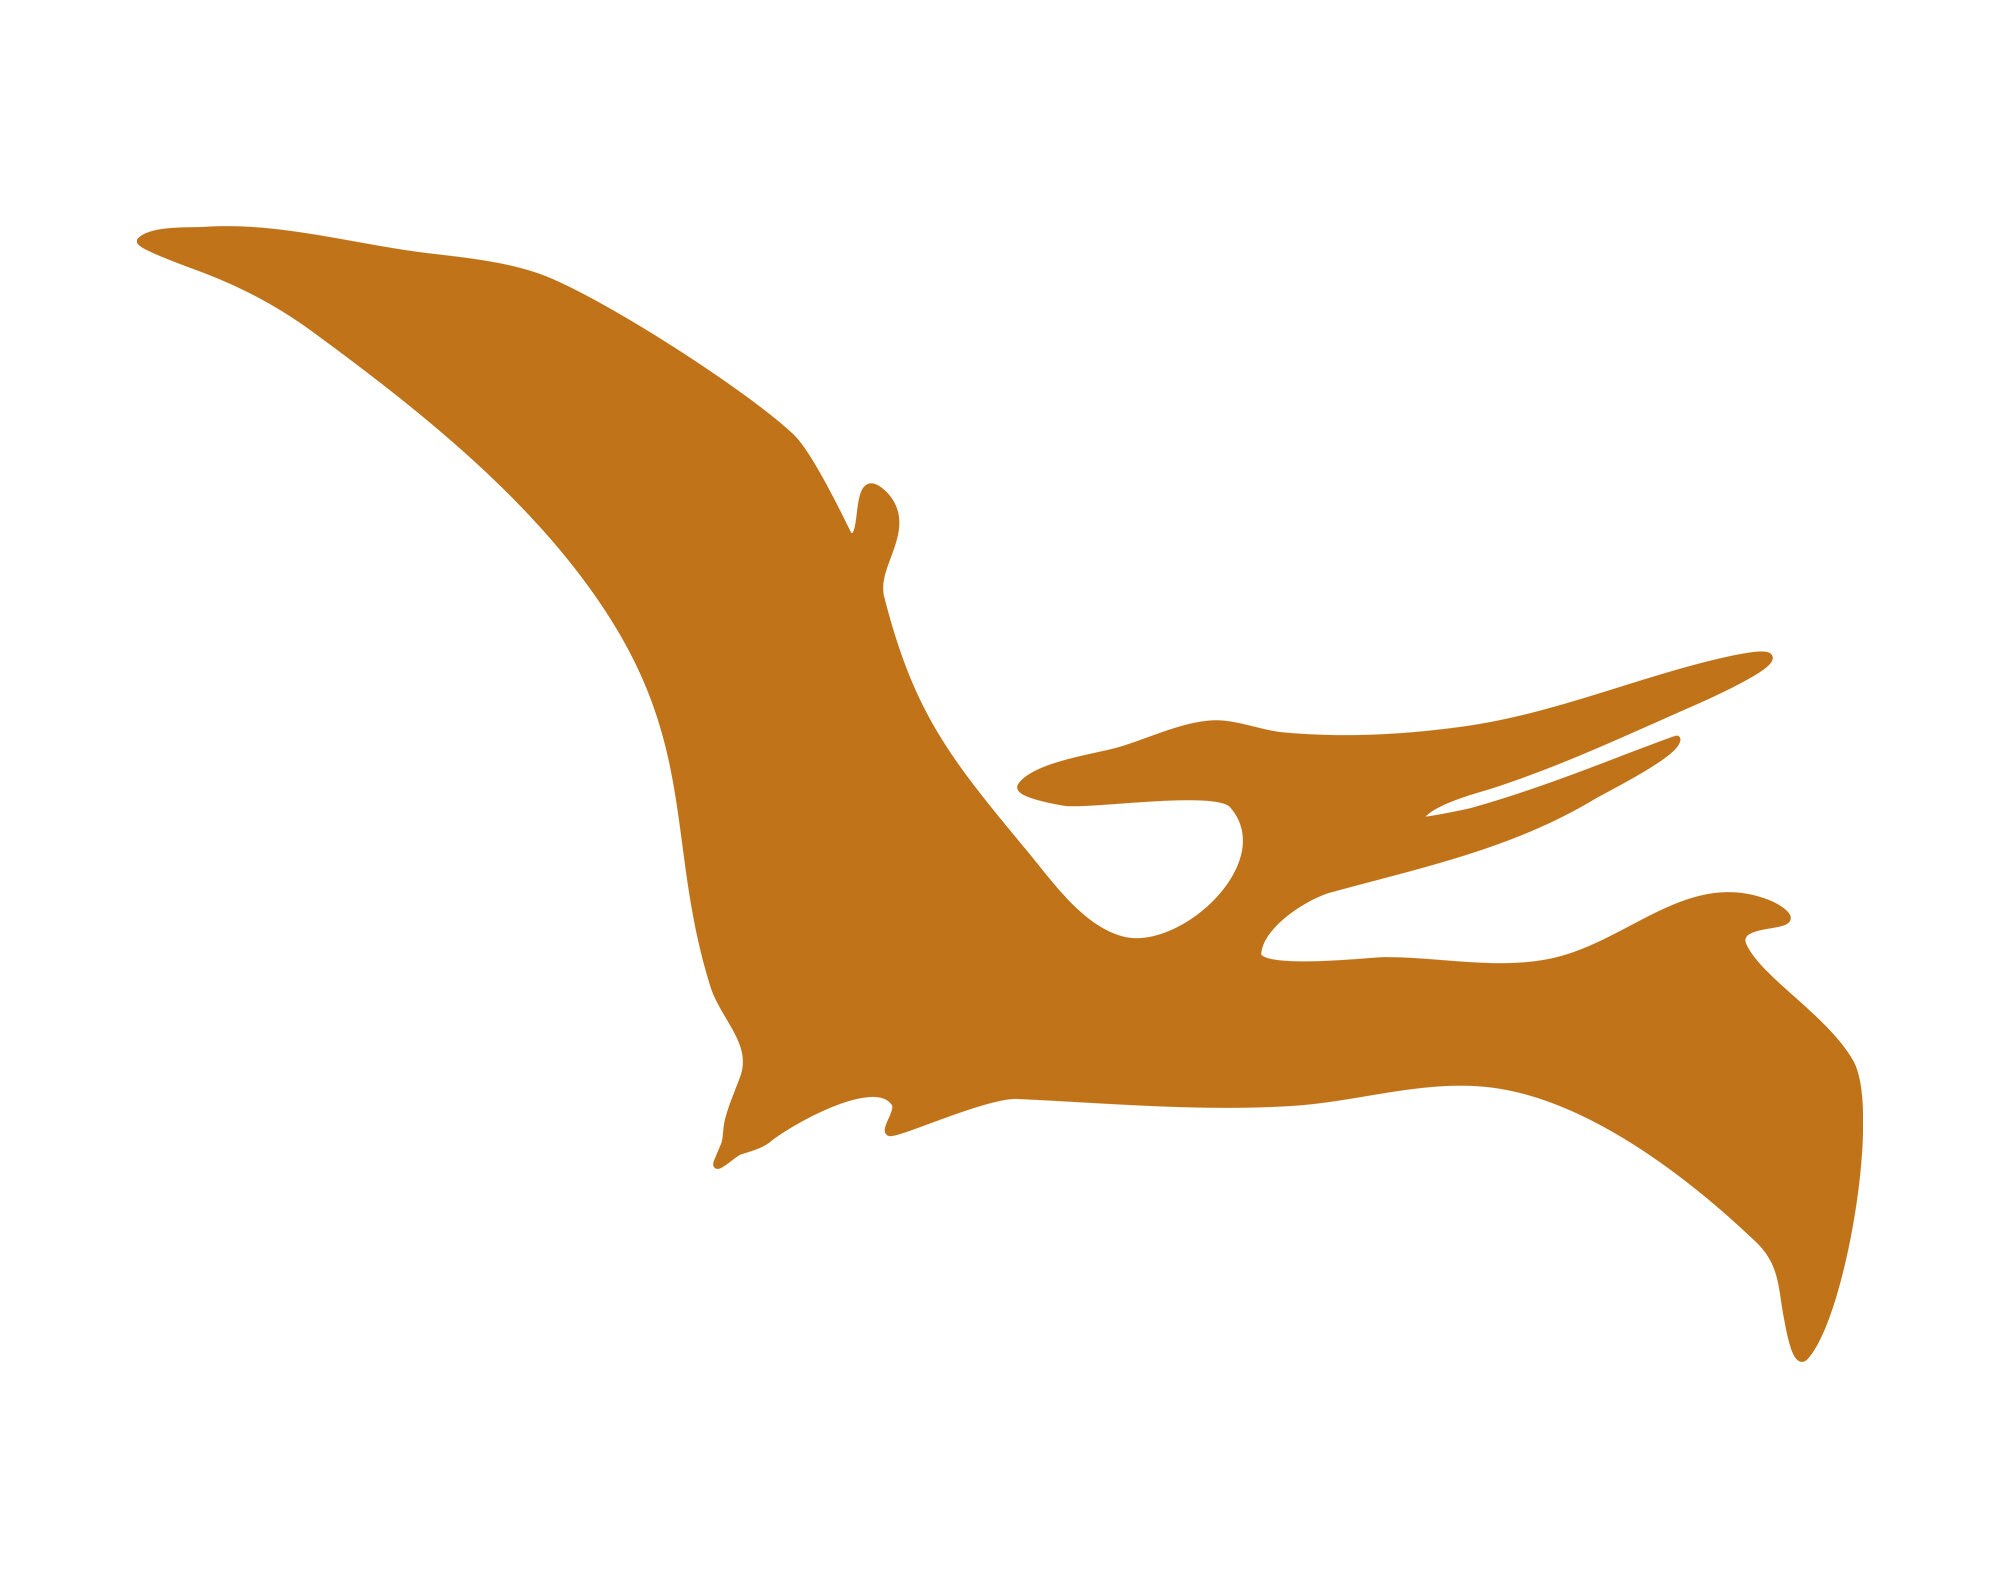 Pterodactyl Dinosaur Bird Shape Svg Png Icon Free Download (#74409) 